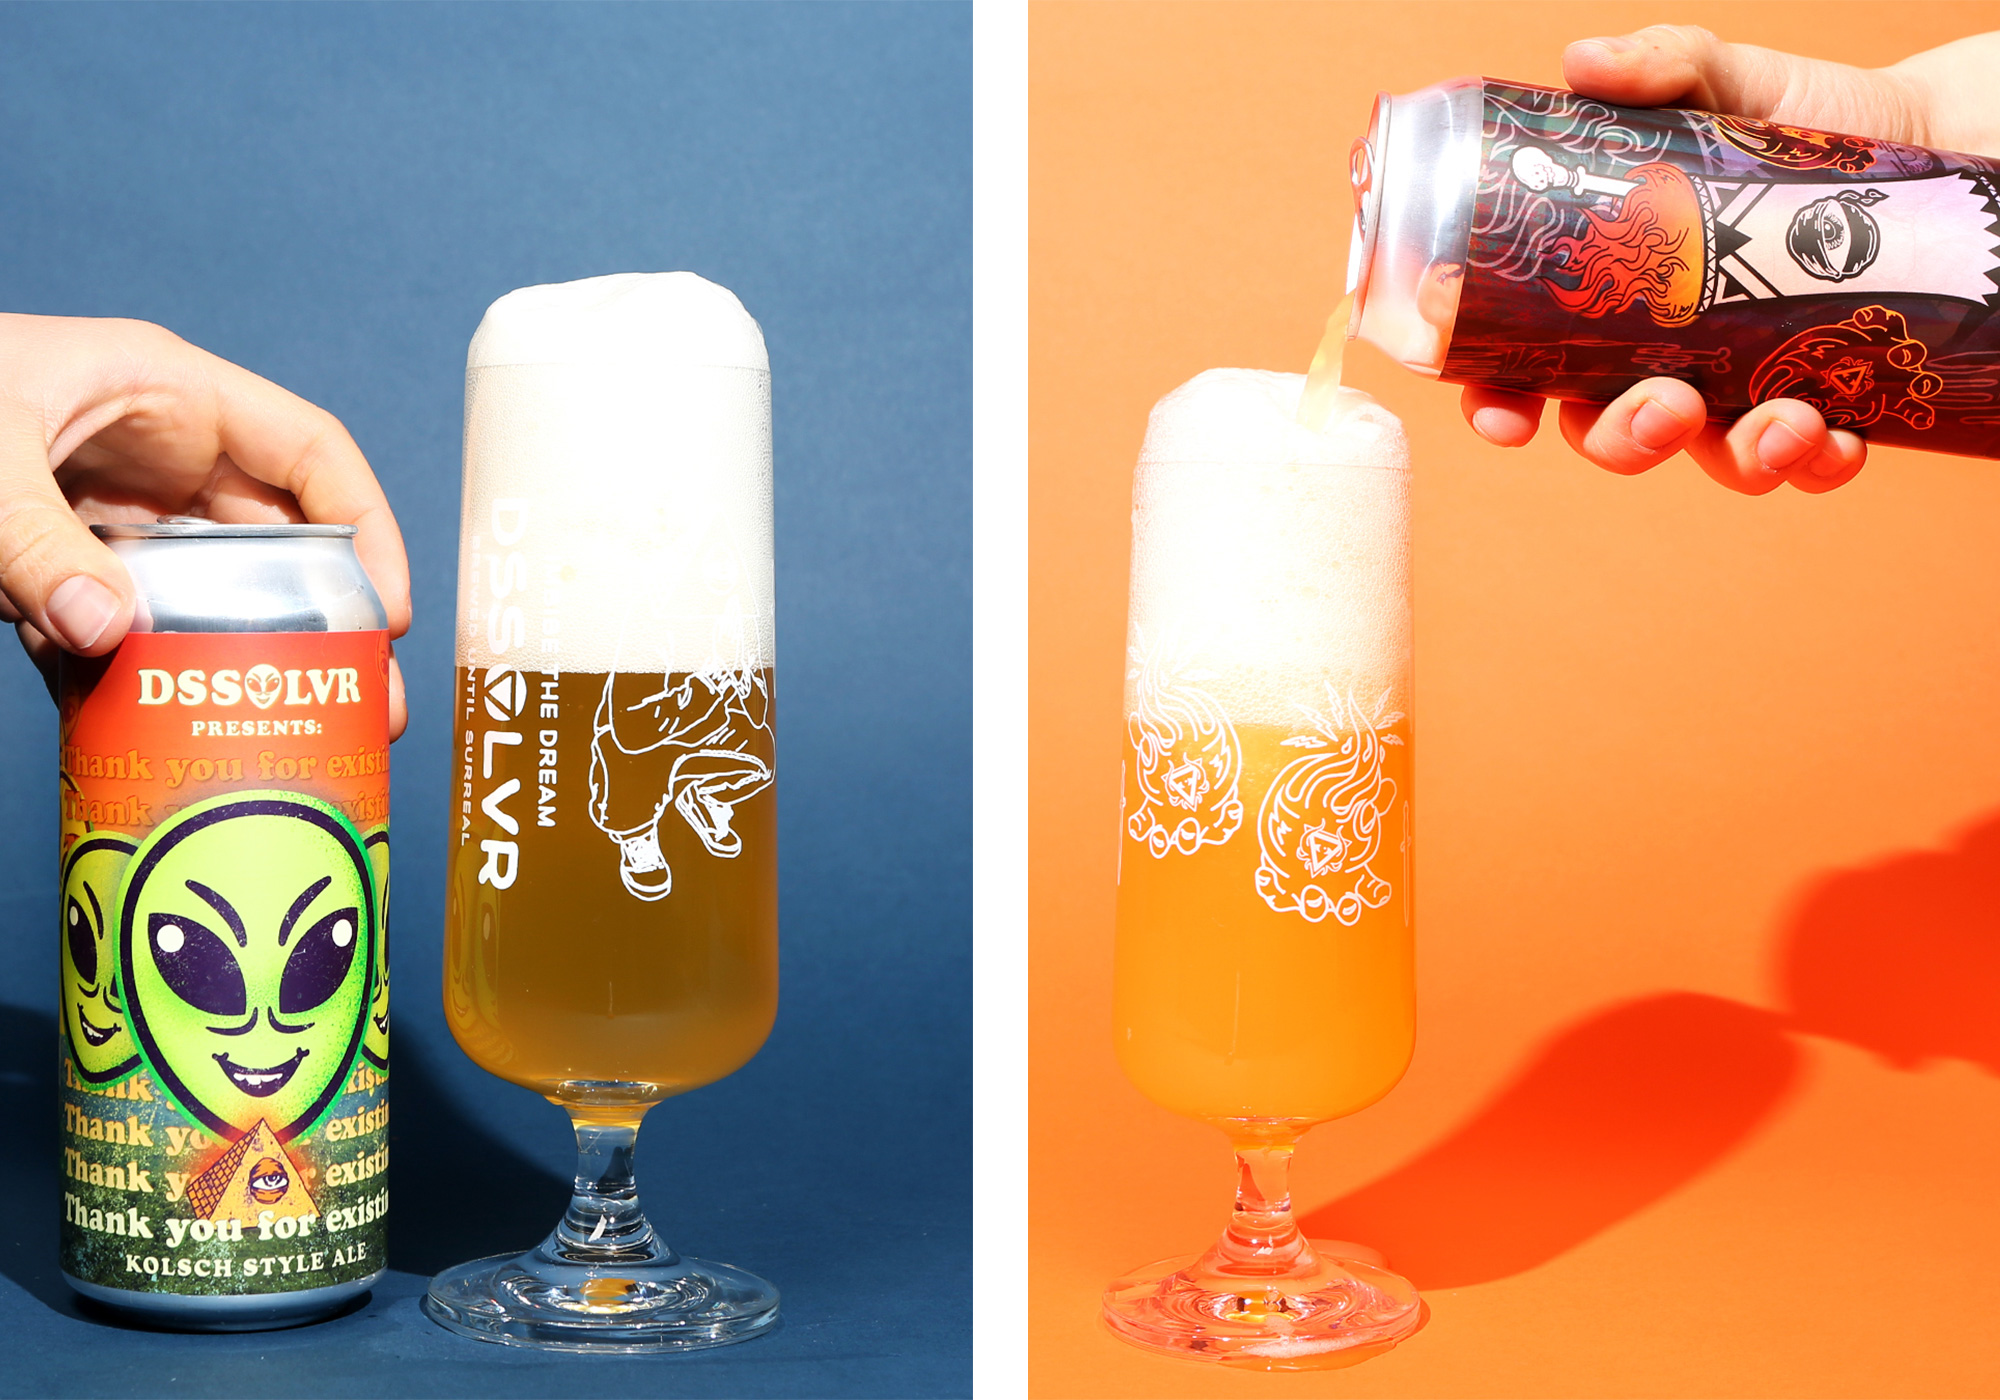 The 20 Best Brewery Instagram Accounts of 2020